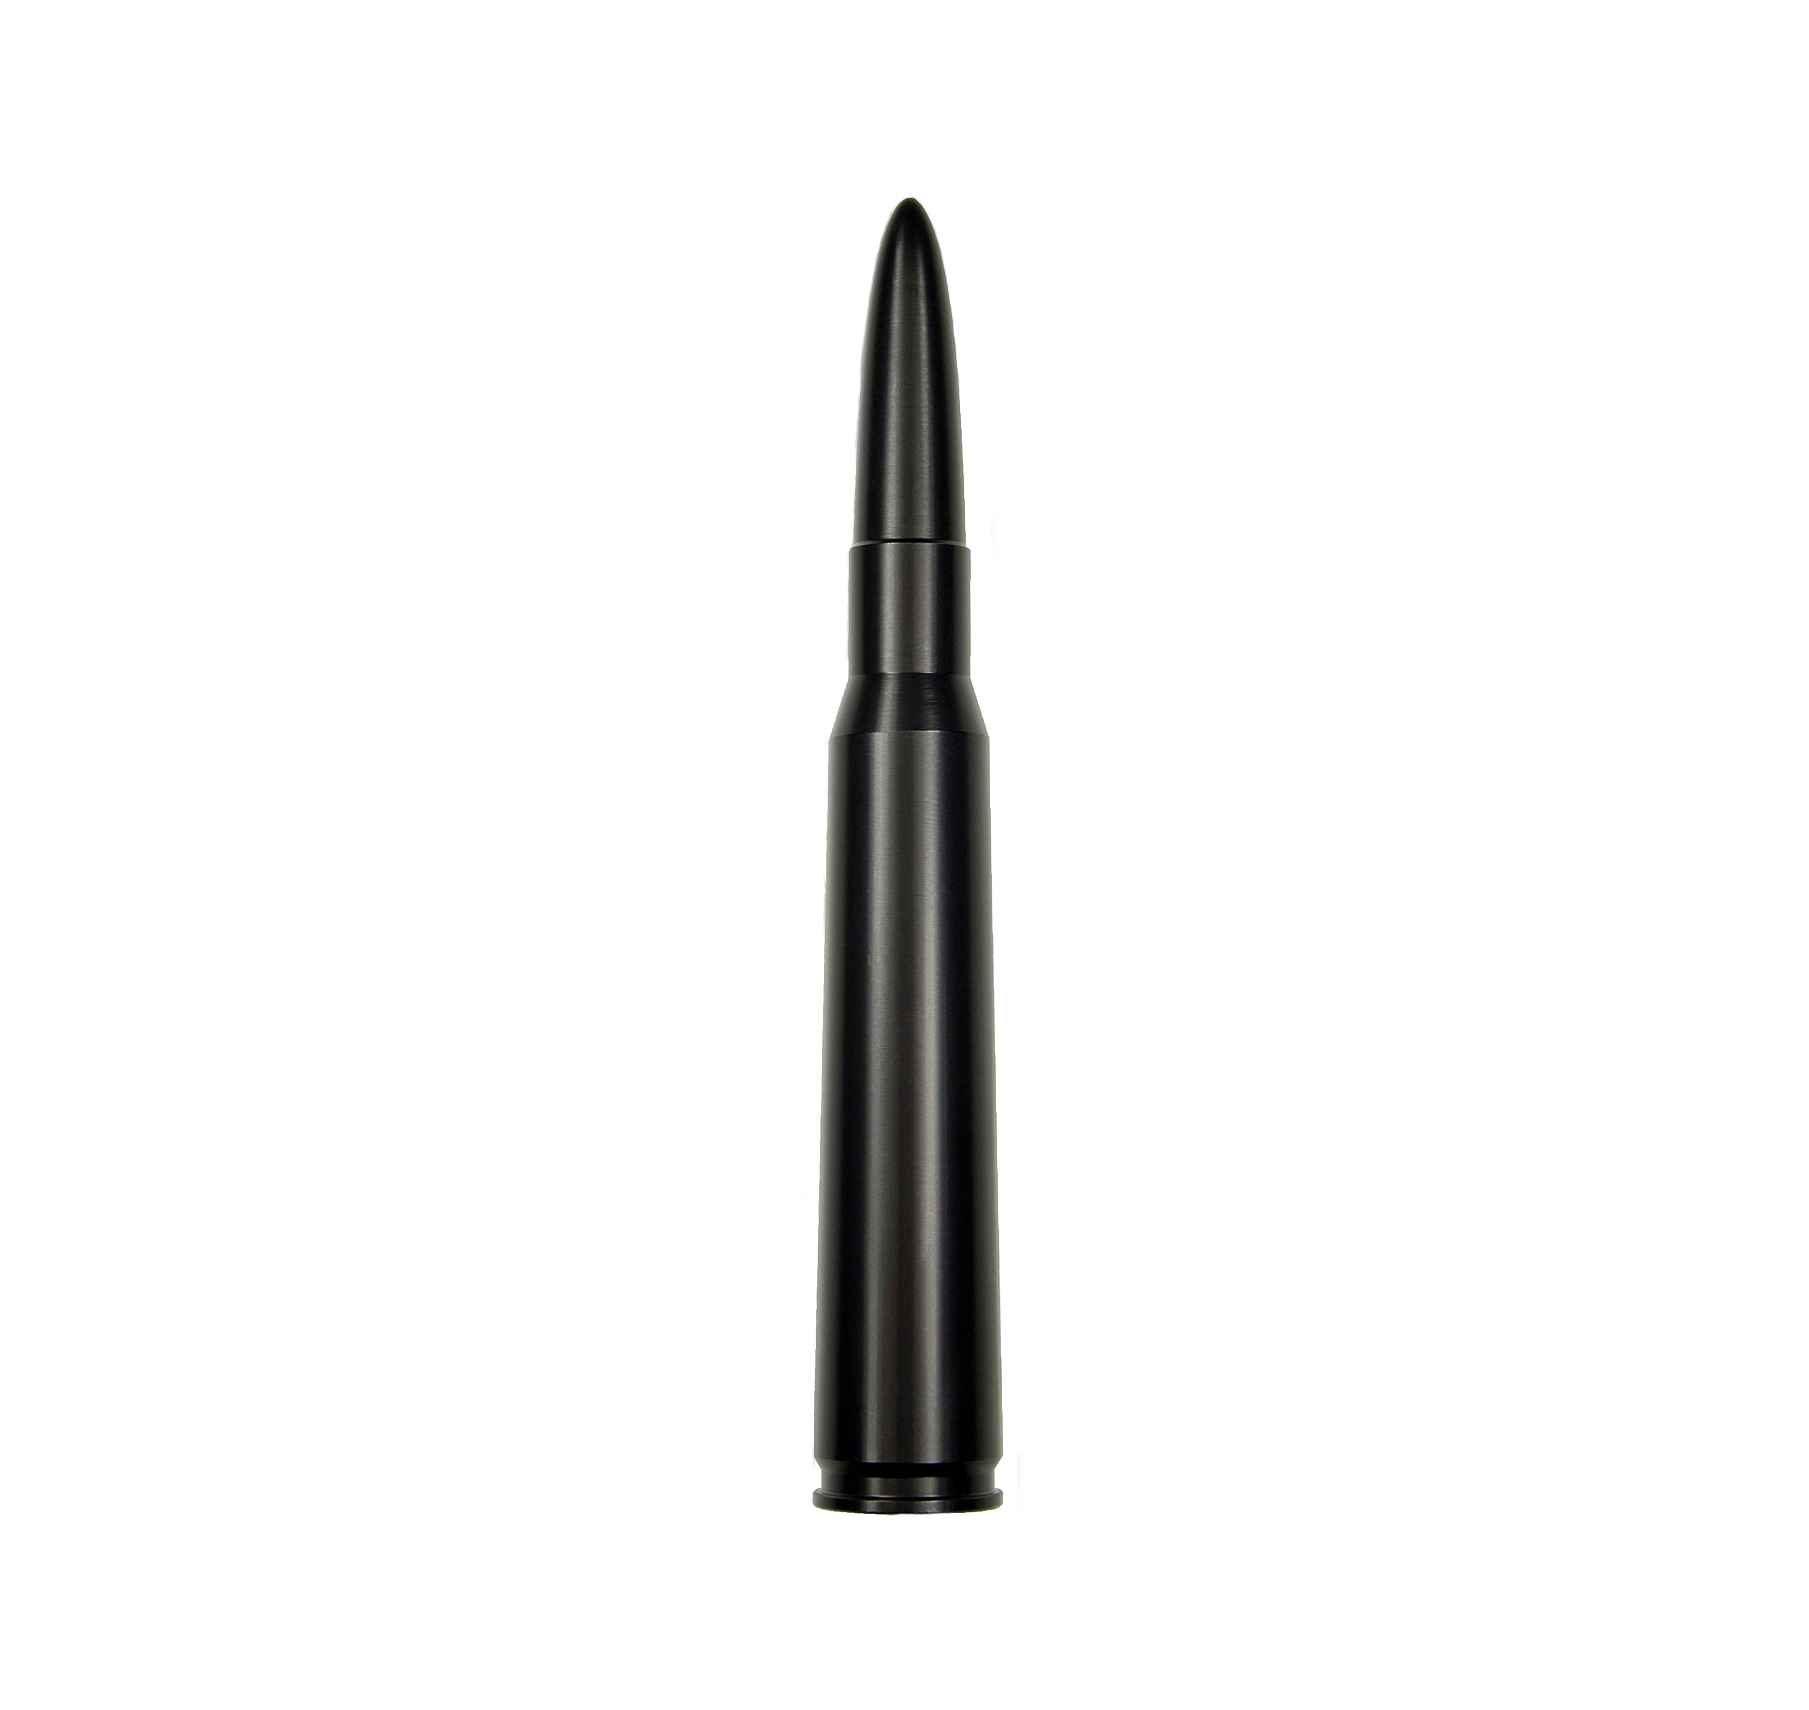 Votex - Made in USA - 50 Caliber Bullet Aluminum Antenna - Part Number A435-BLACK-NO